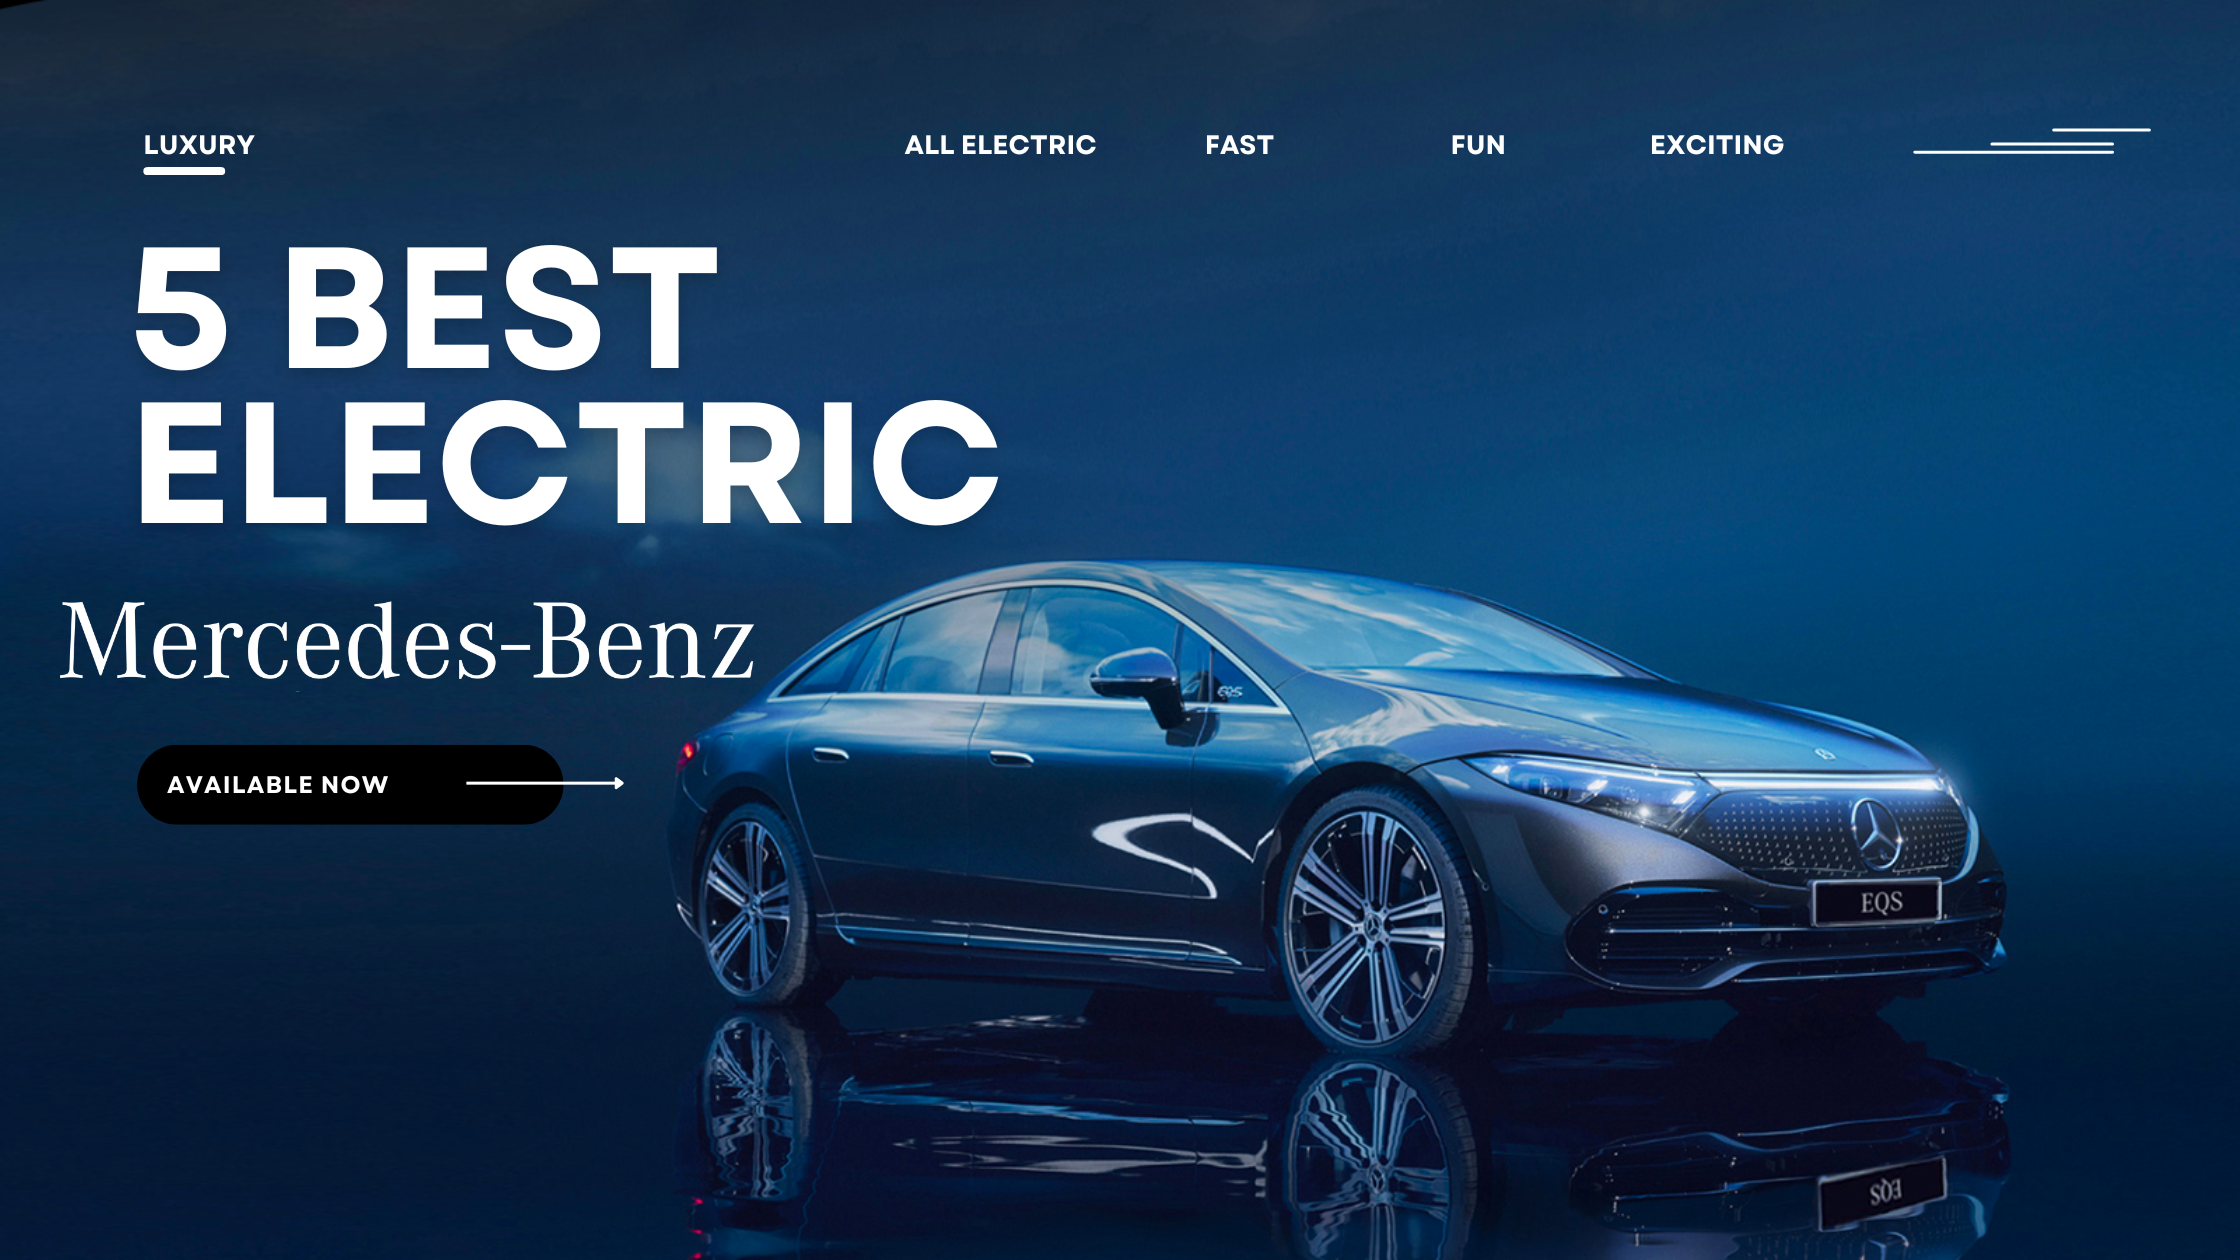 5 best electric ehilcles availble now at Mercedes-Benz of Littleton